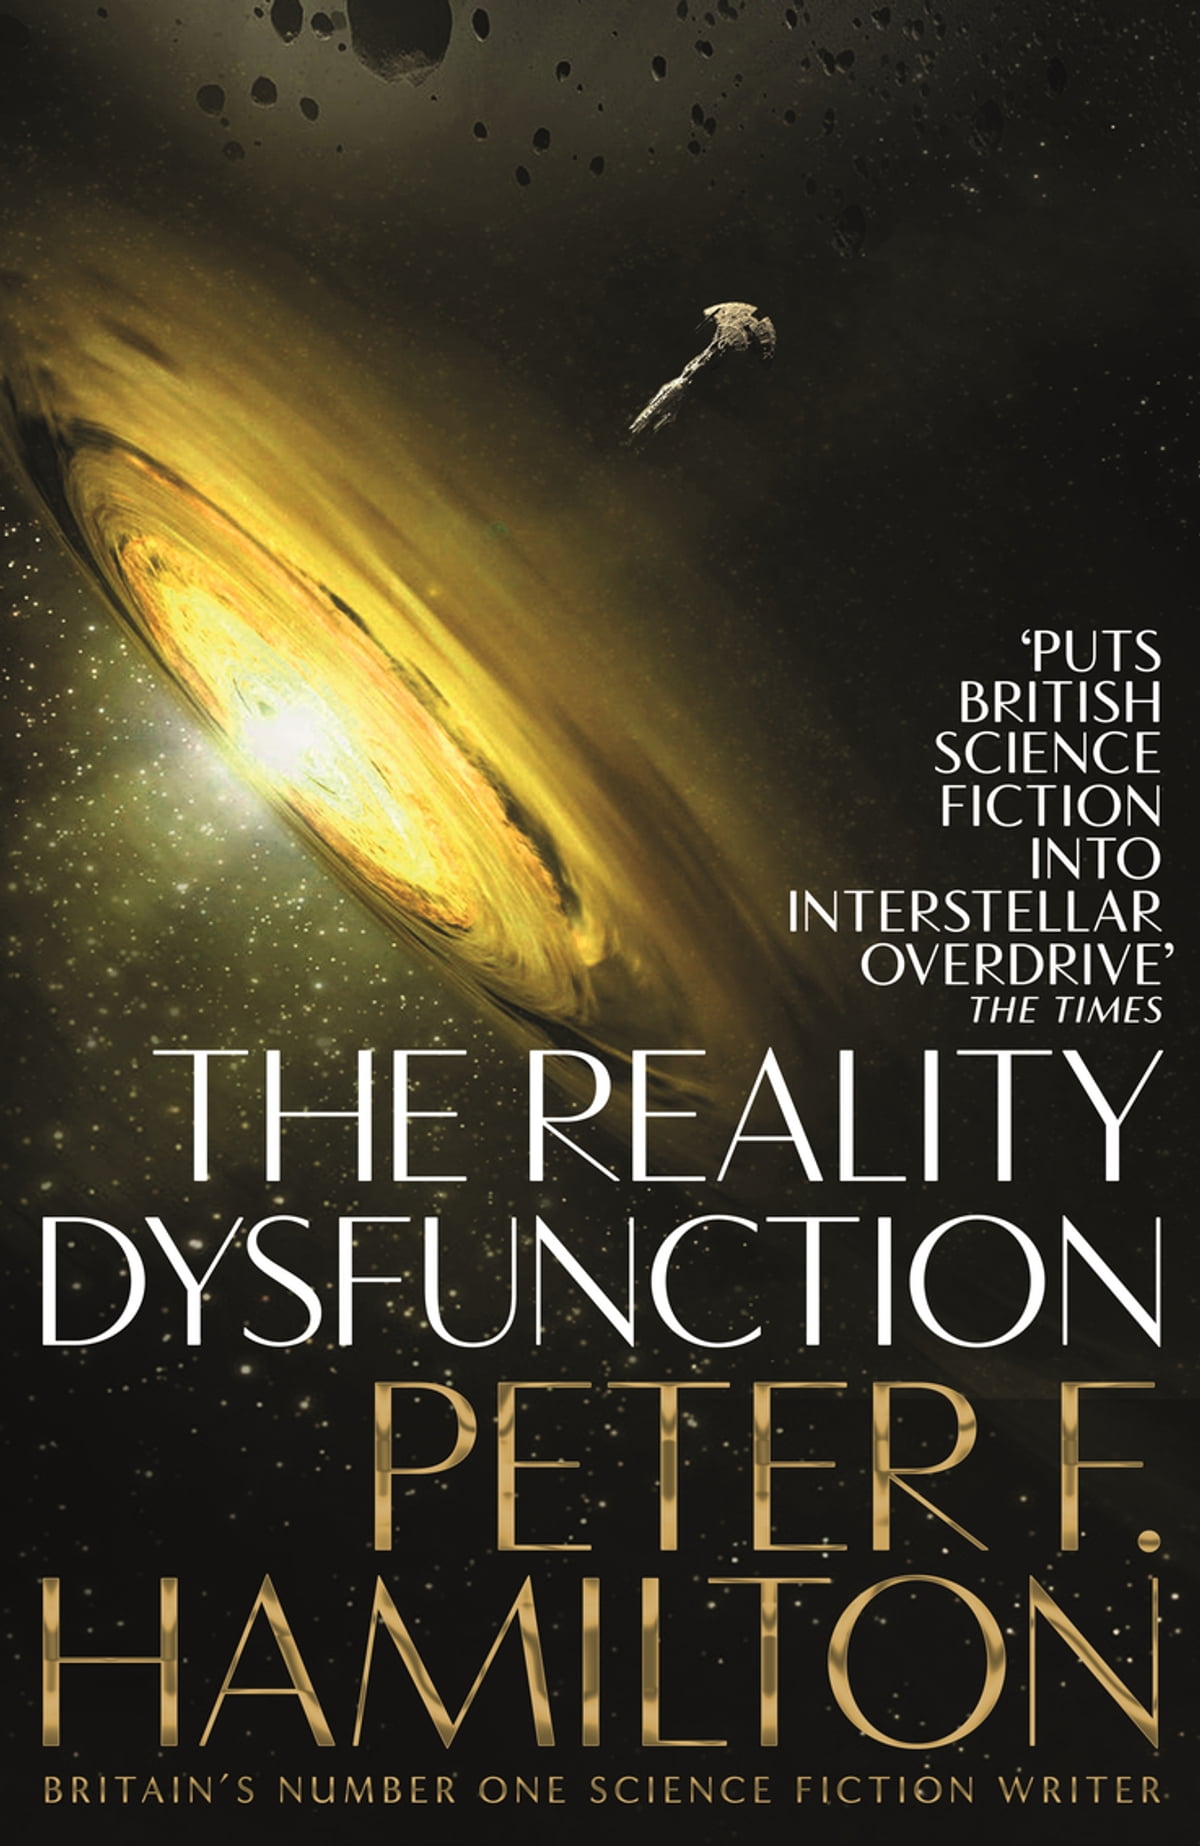 Peter F. Hamilton – The Reality Dysfunction (1996) Review